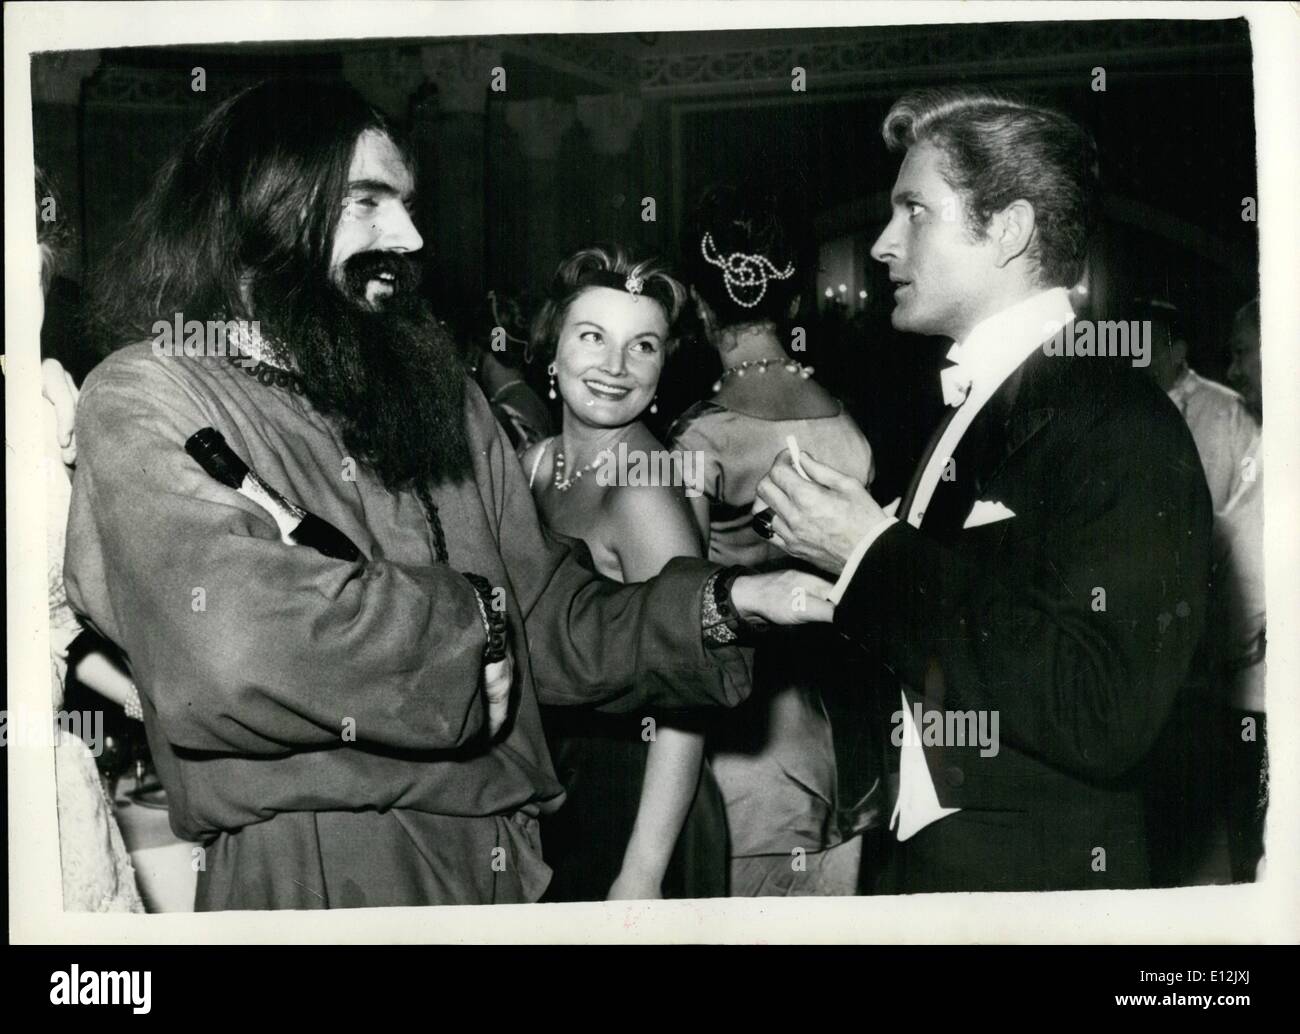 Feb. 24, 2012 - Filming ''The Rasputin's Nights'' - In Rome: The new film ''The Rasputin's Nights'' - is now being made in the Cinecitta studios in Rome - with Edmund Purdom as Rasputin - John Barrymore JNR. as Prince Yussopov and Jamy Clair as his wife. Photo shows Edmund Purdom as Rasputin - and John Barrymore JR, as Prince Yusapov - during the filming in a ''night club of the Nicholas II'' Era, in Sst. Petersburg. Stock Photo